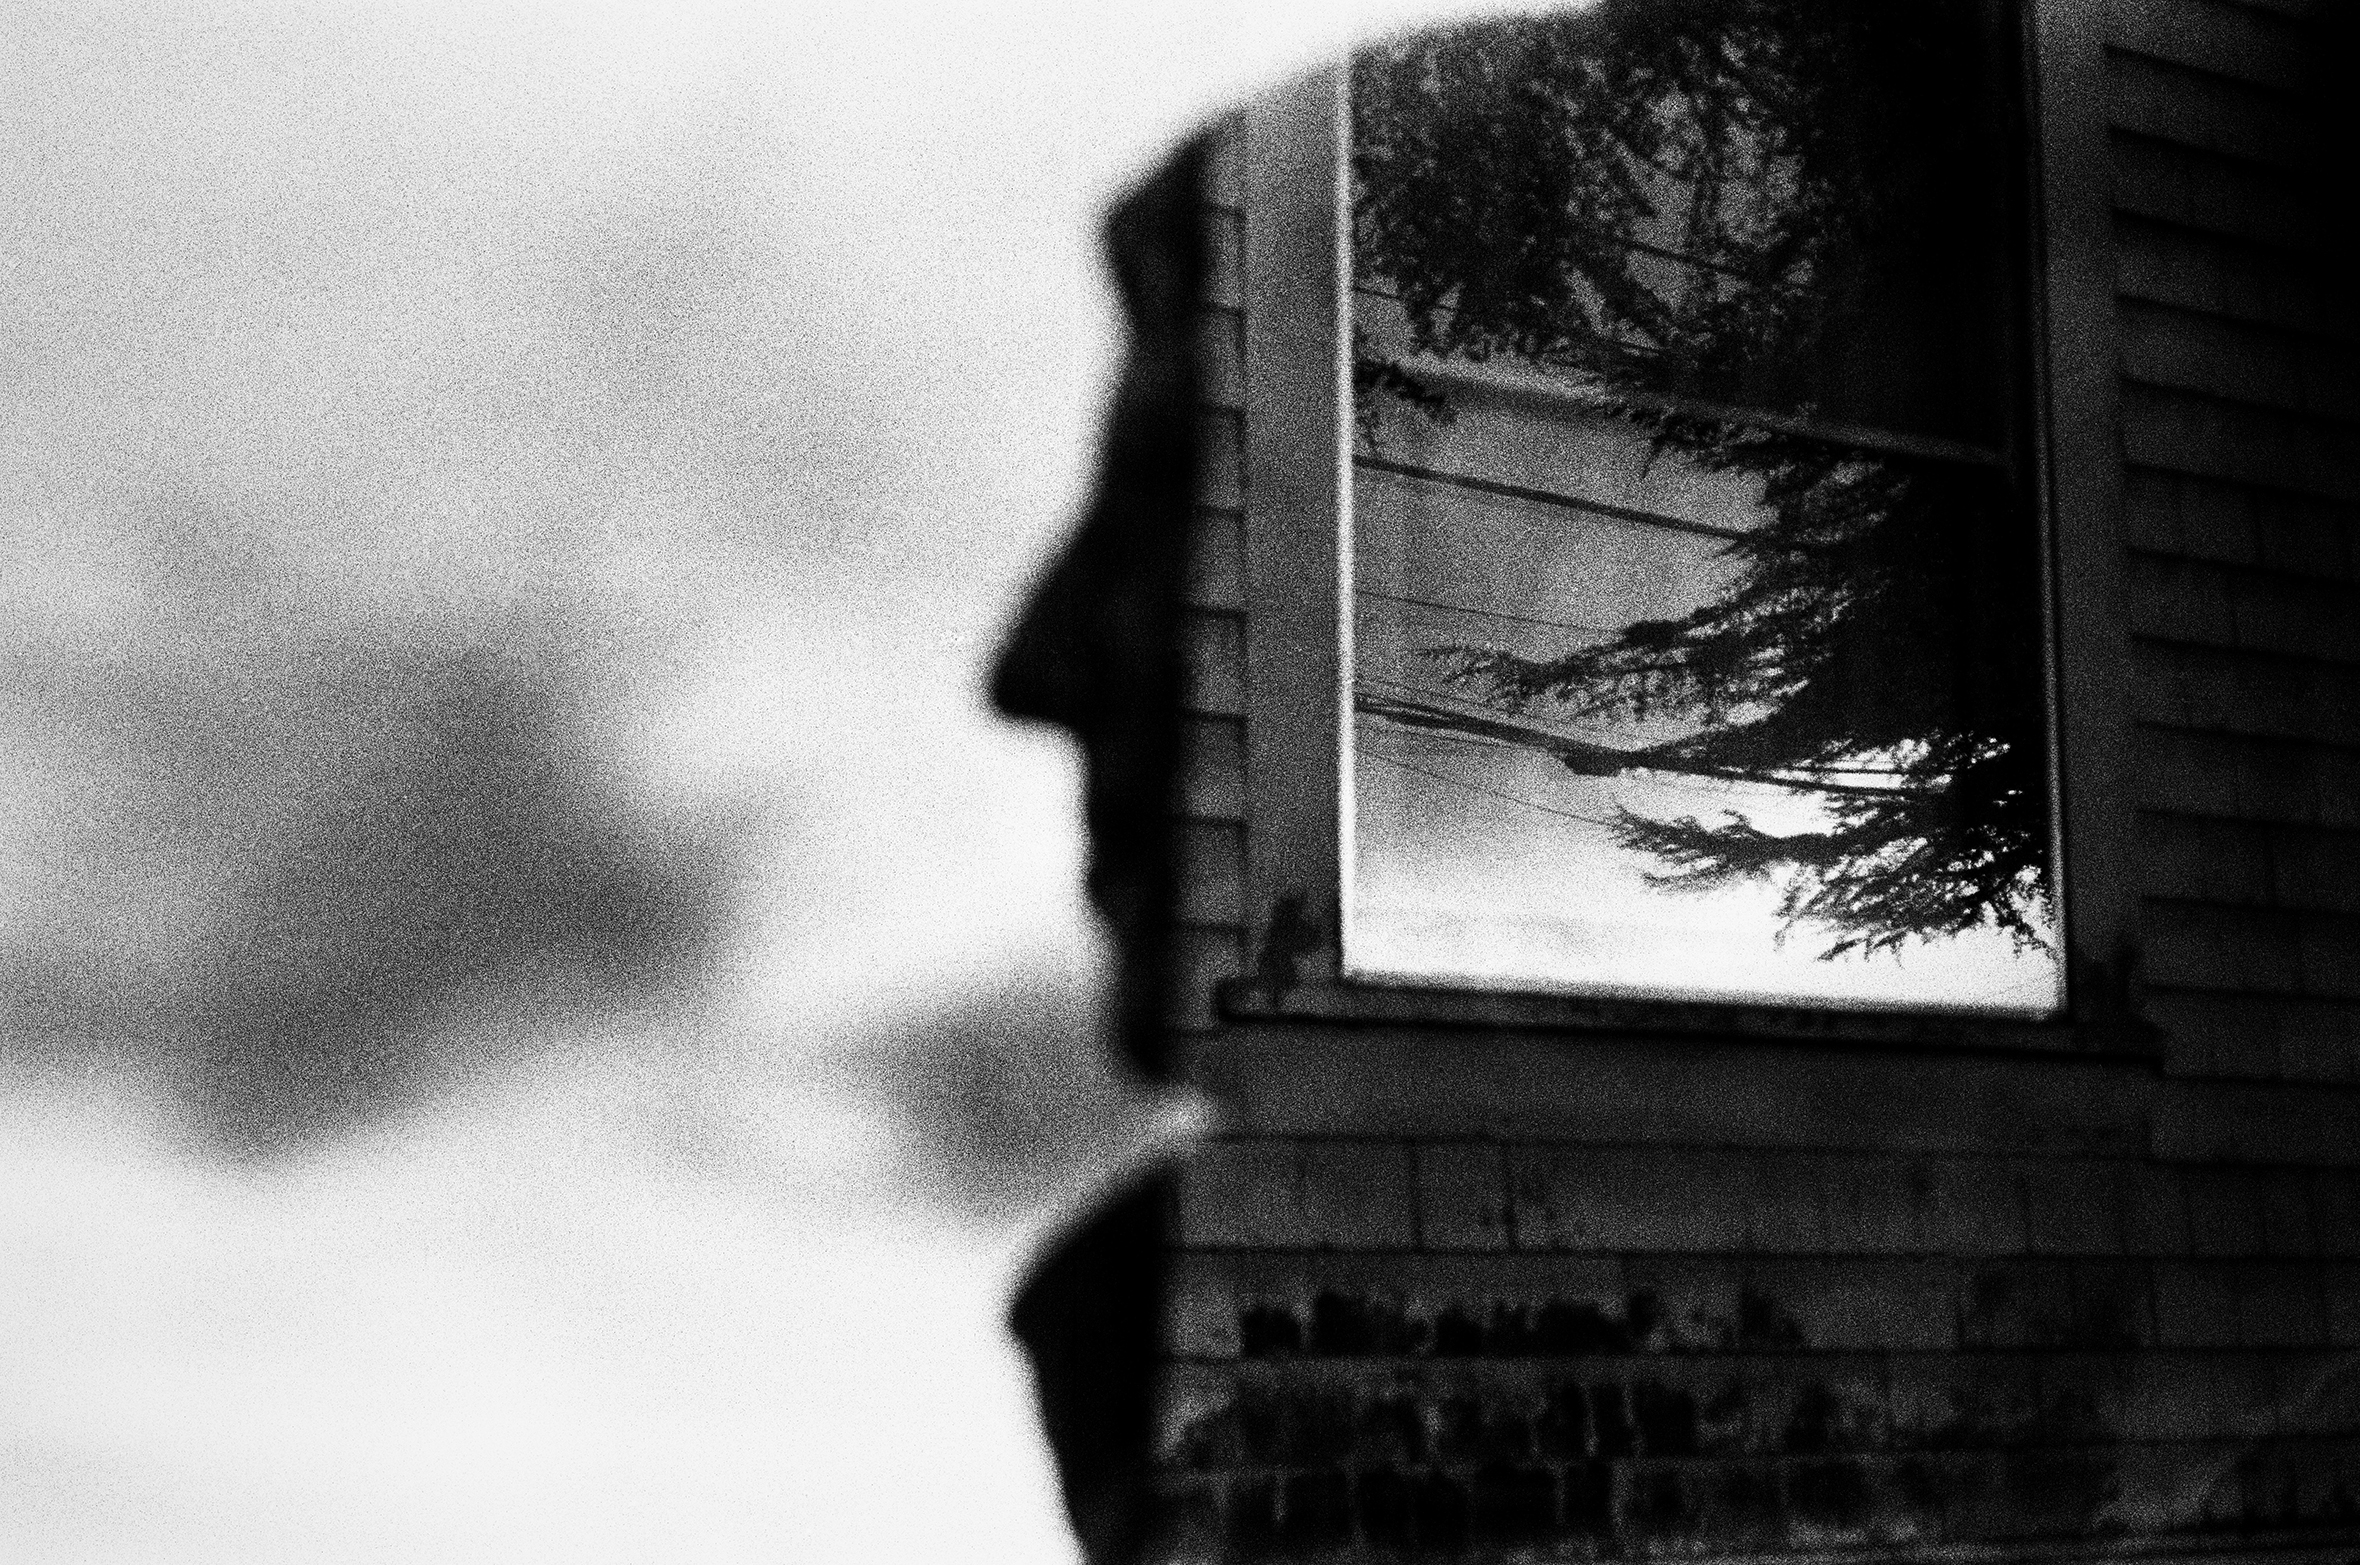 A silhouette of a profile of a person’s face superimposed on a portion of a house with a window with tree branches reflected in it. The forehead, nose, mouth, and chin look like they are coming out of the corner of the house.